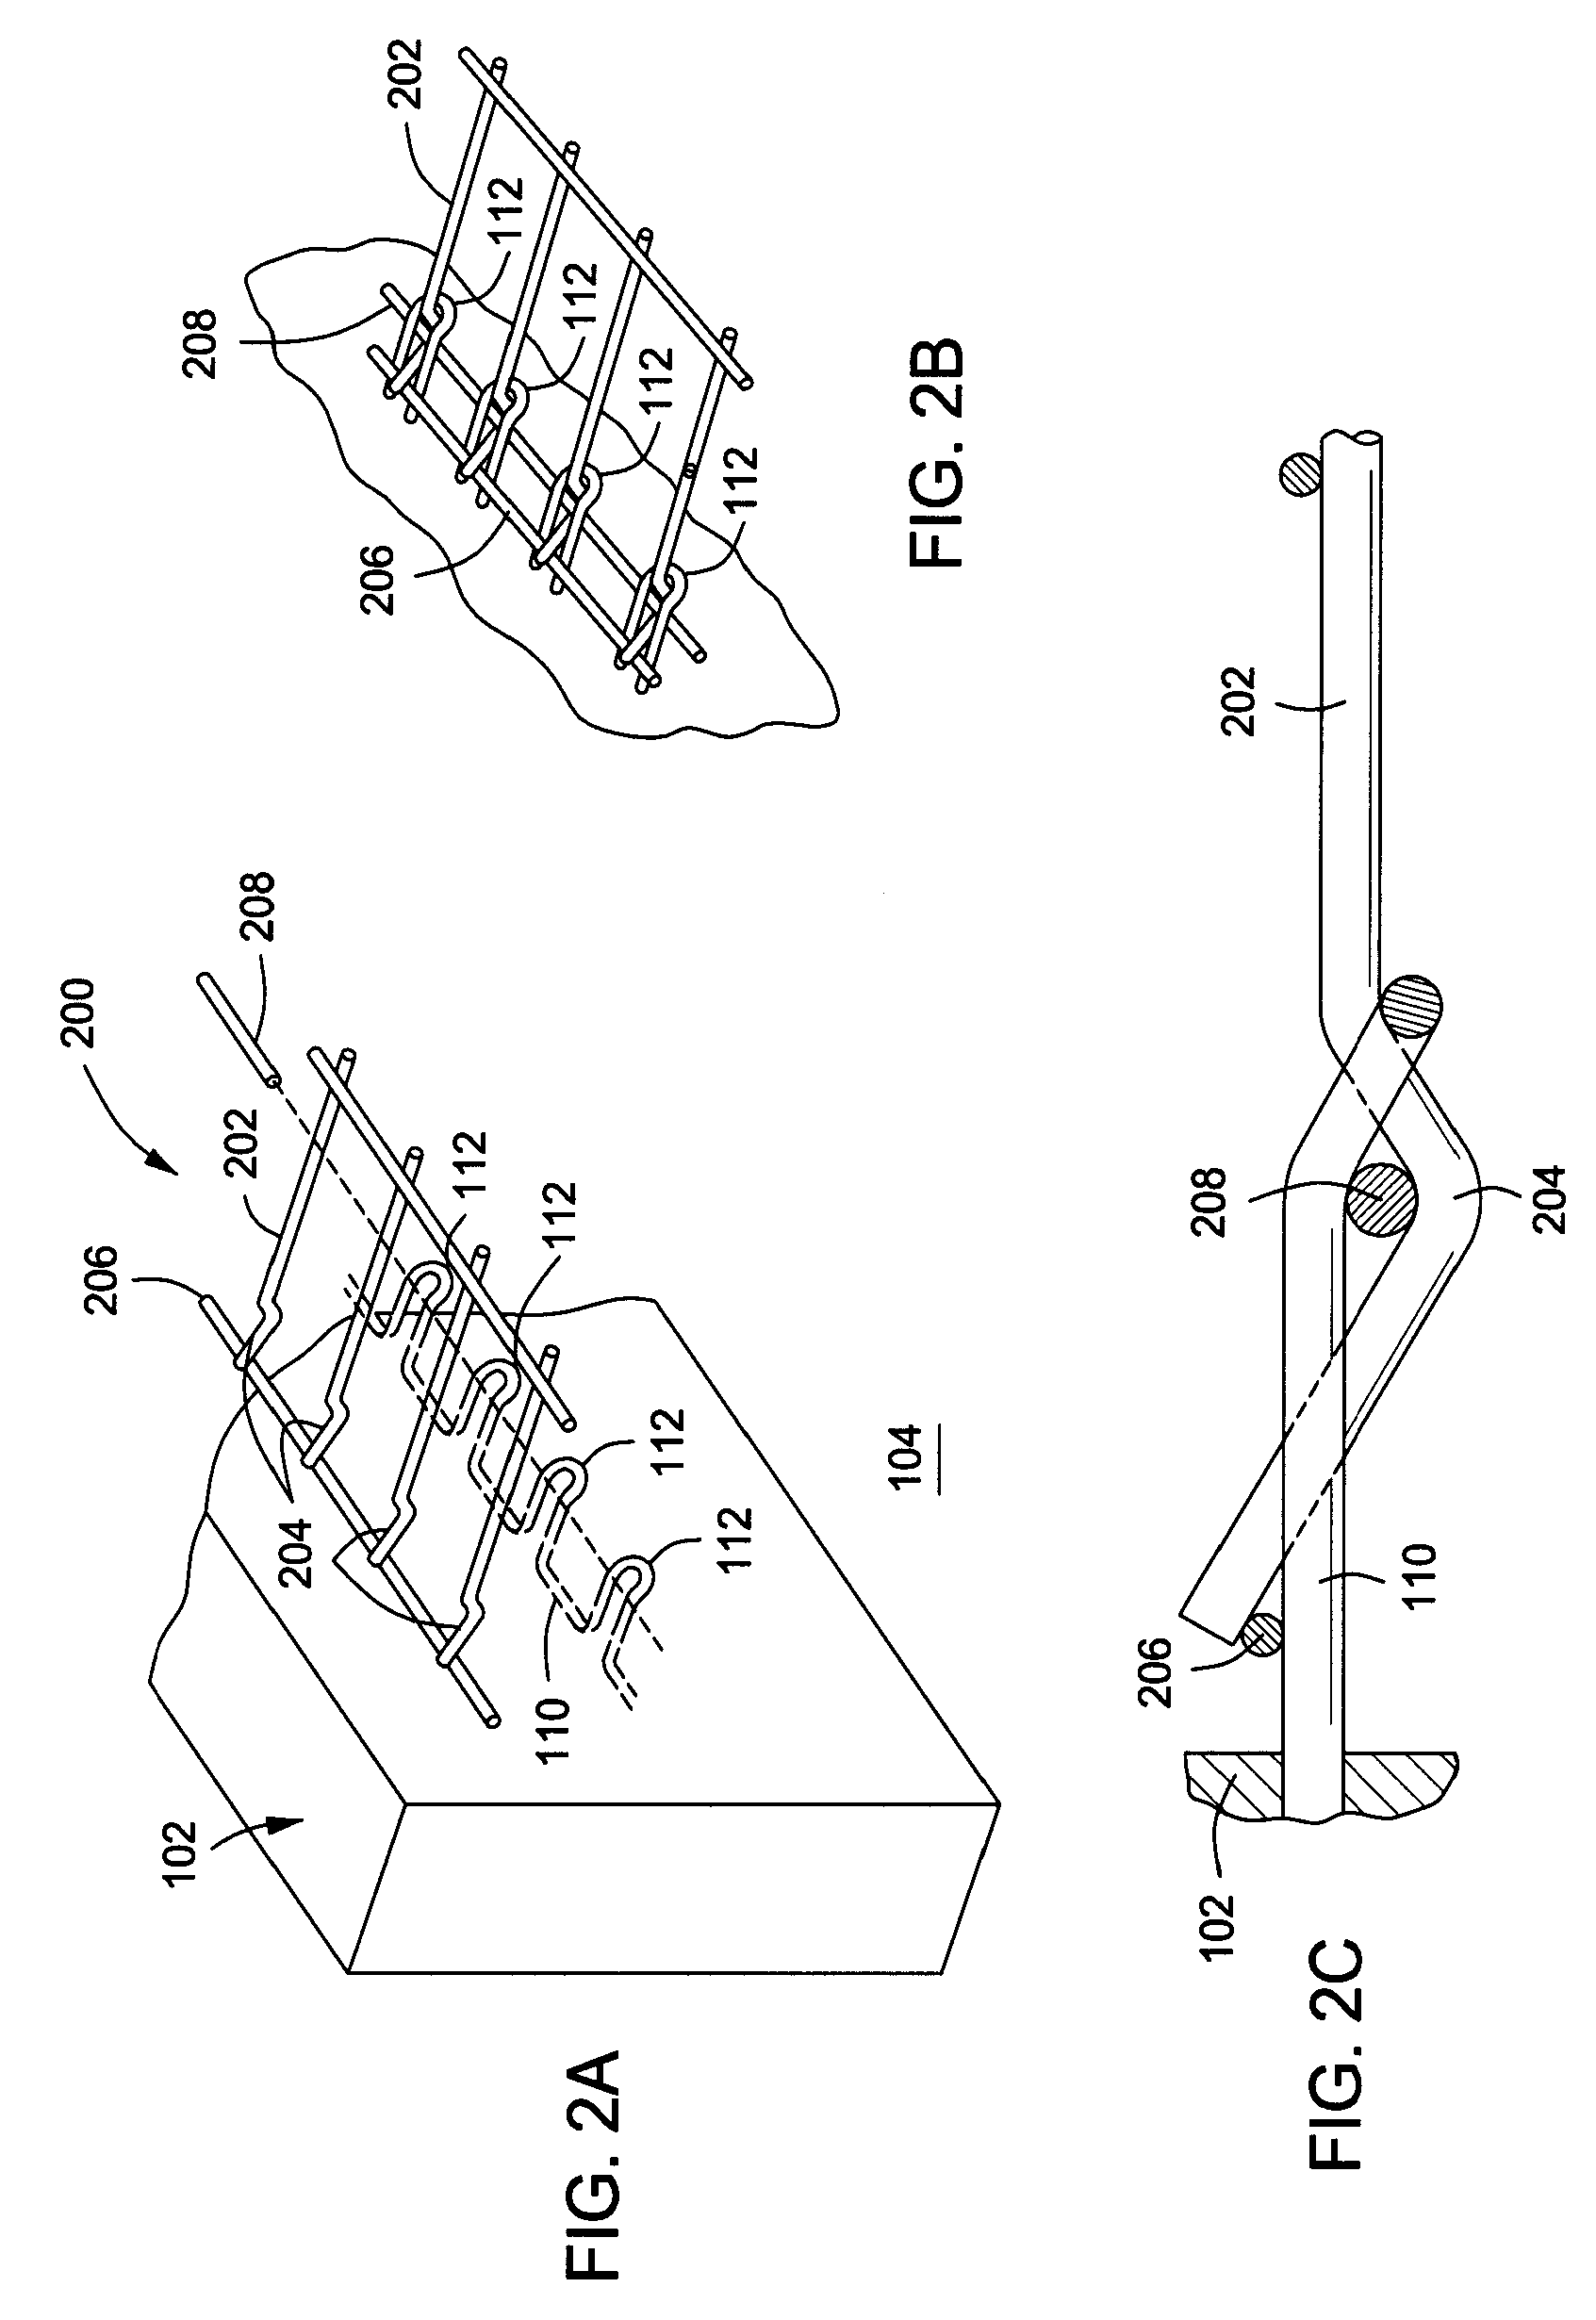 Soil reinforcing retaining wall anchor